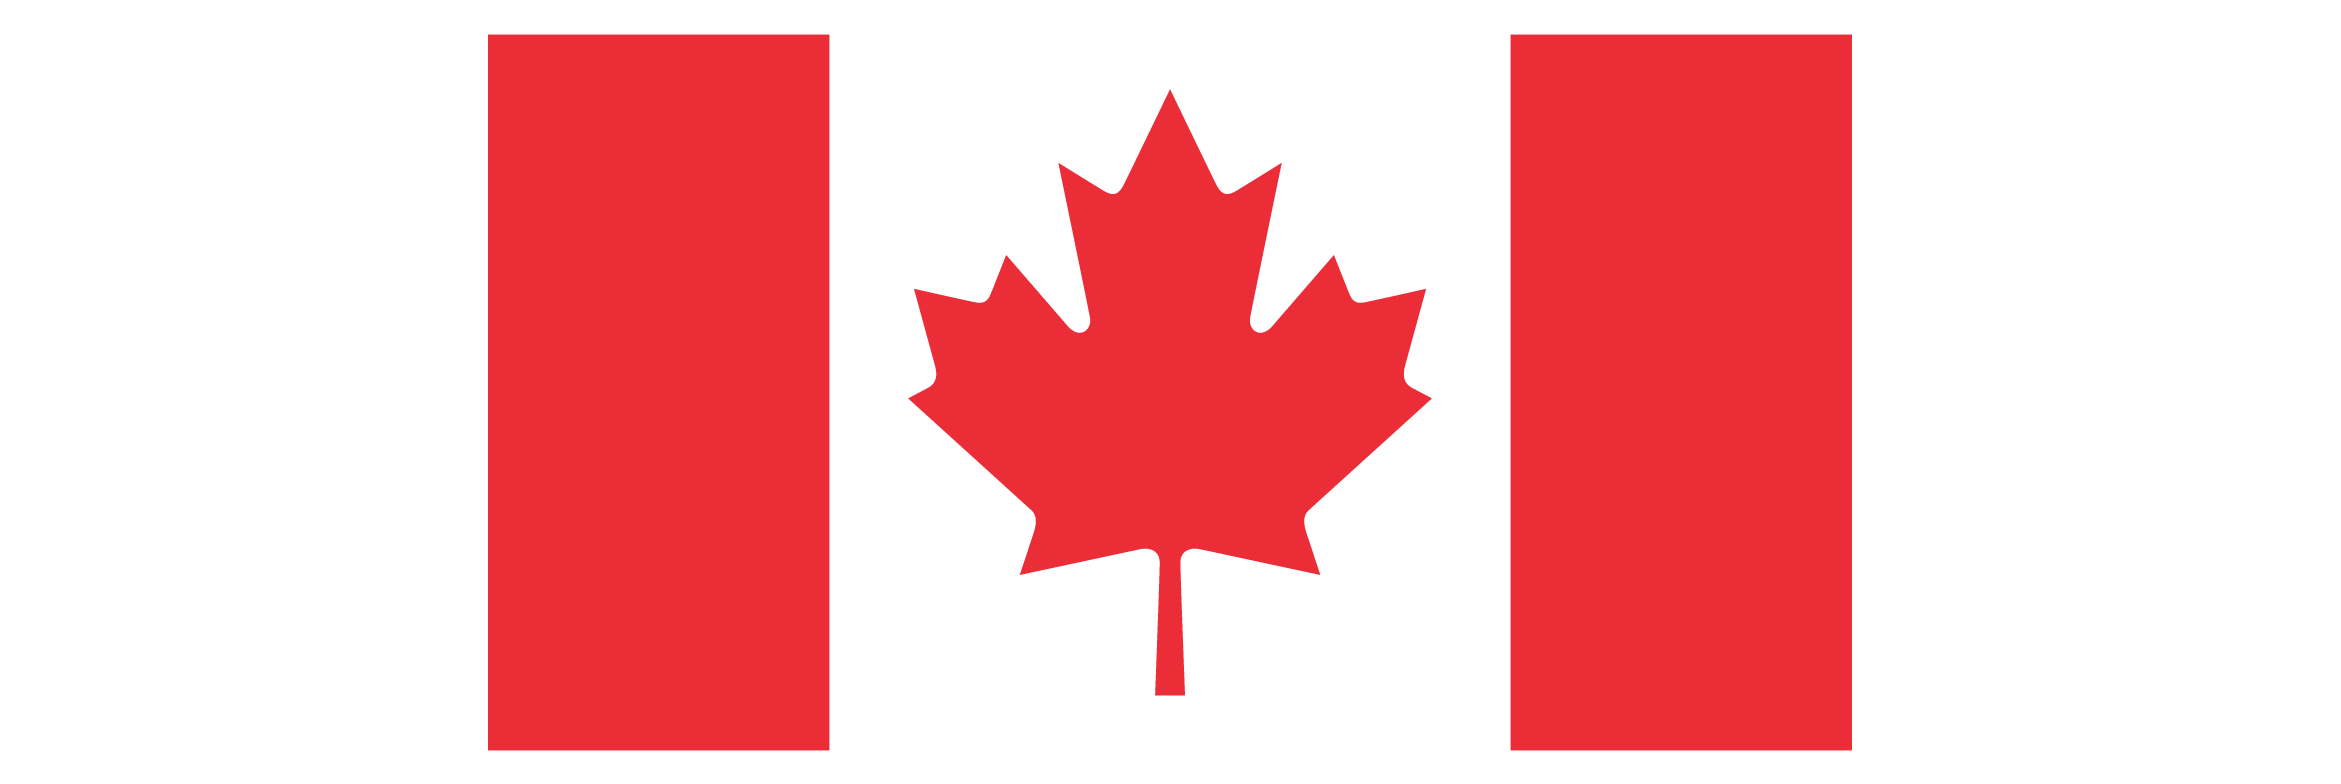 The flag symbol. One of the official symbols of the Government of Canada.